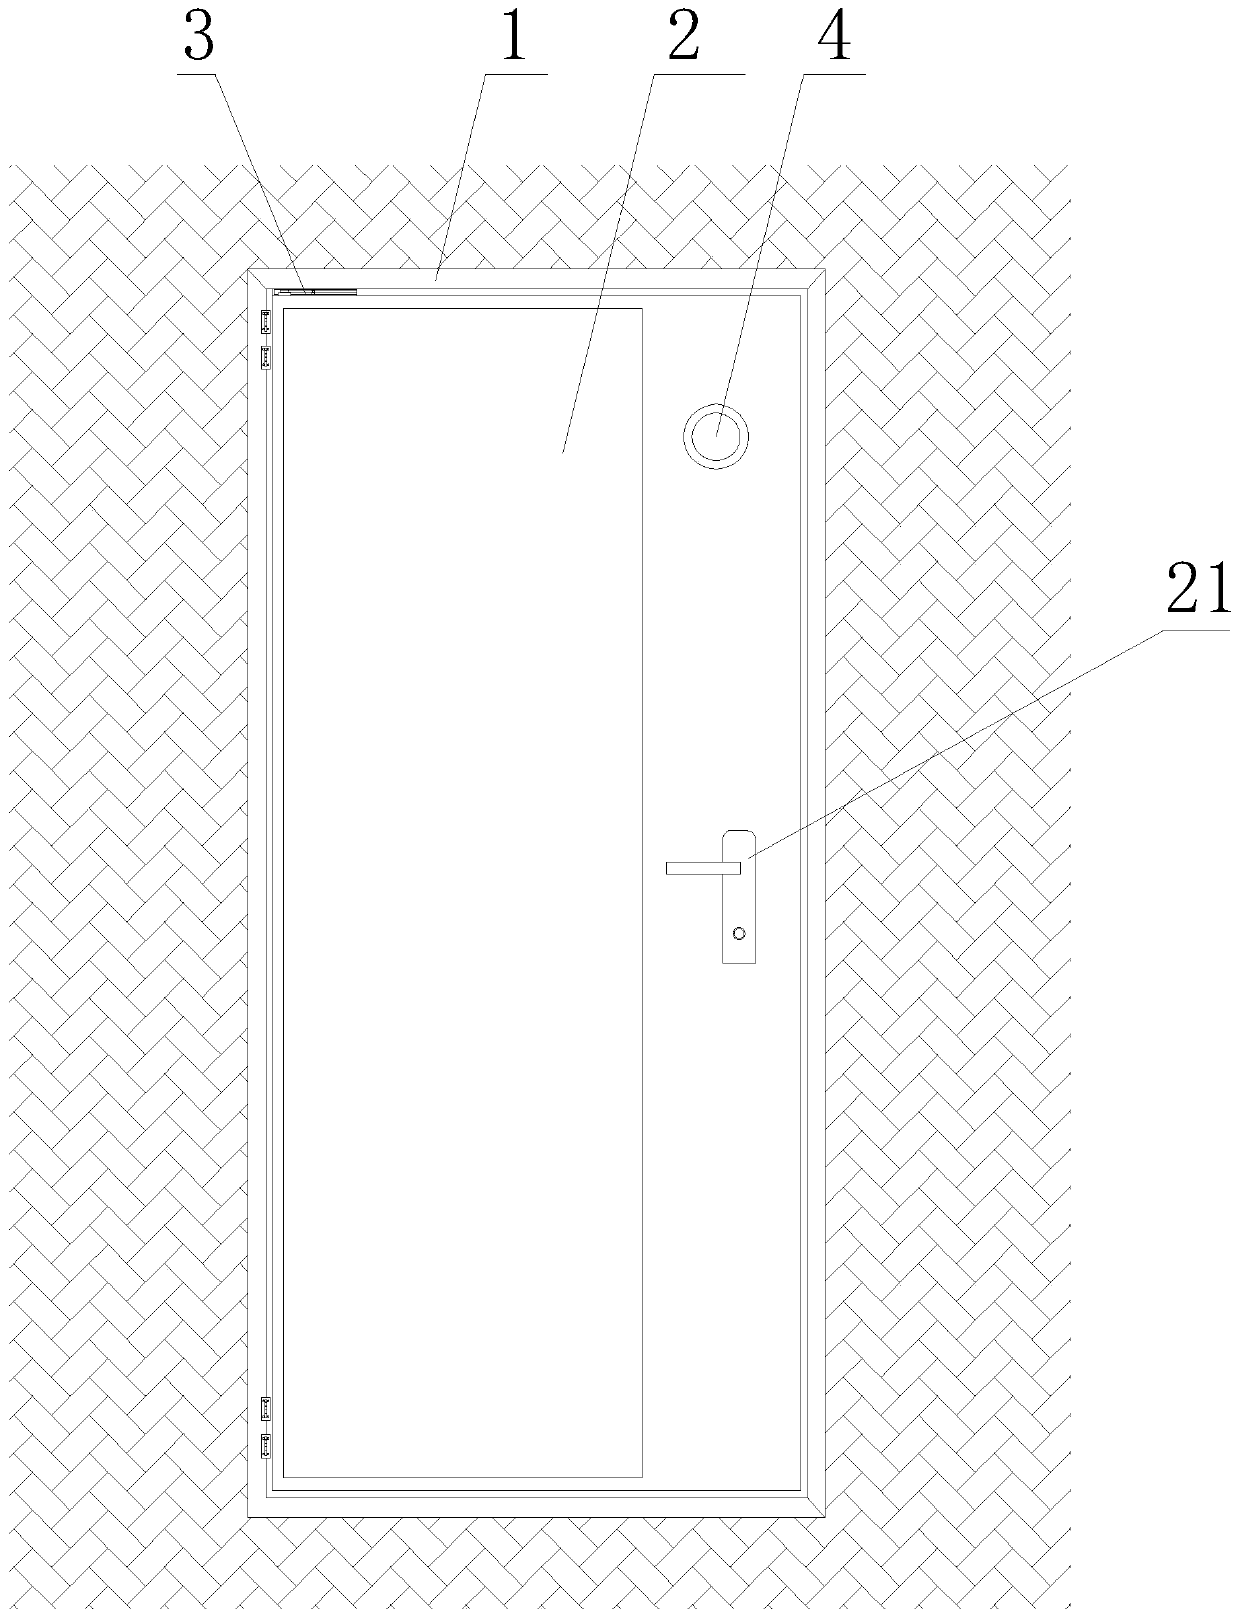 Safety door capable of automatically opening during fire and method